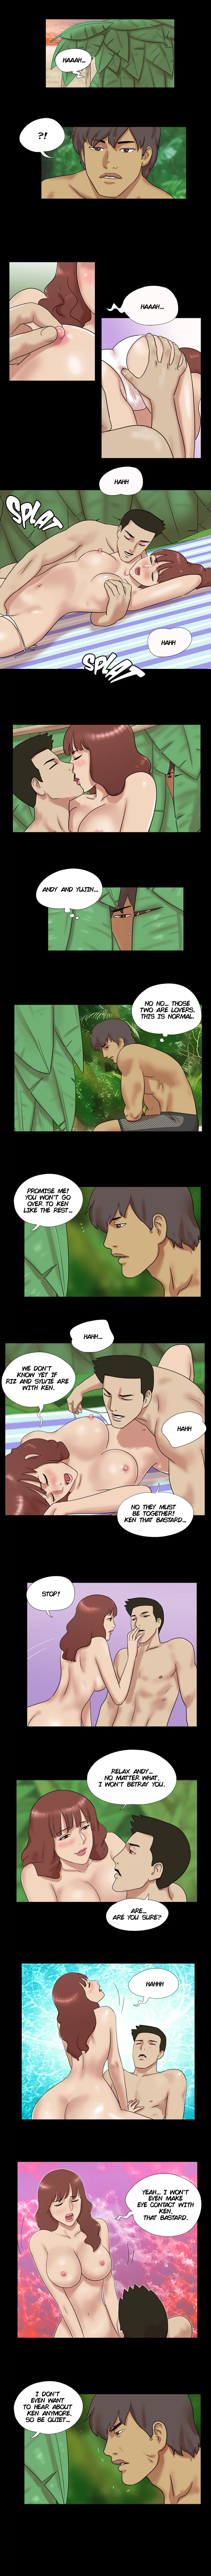 Naked Island - Chapter 9 Page 2